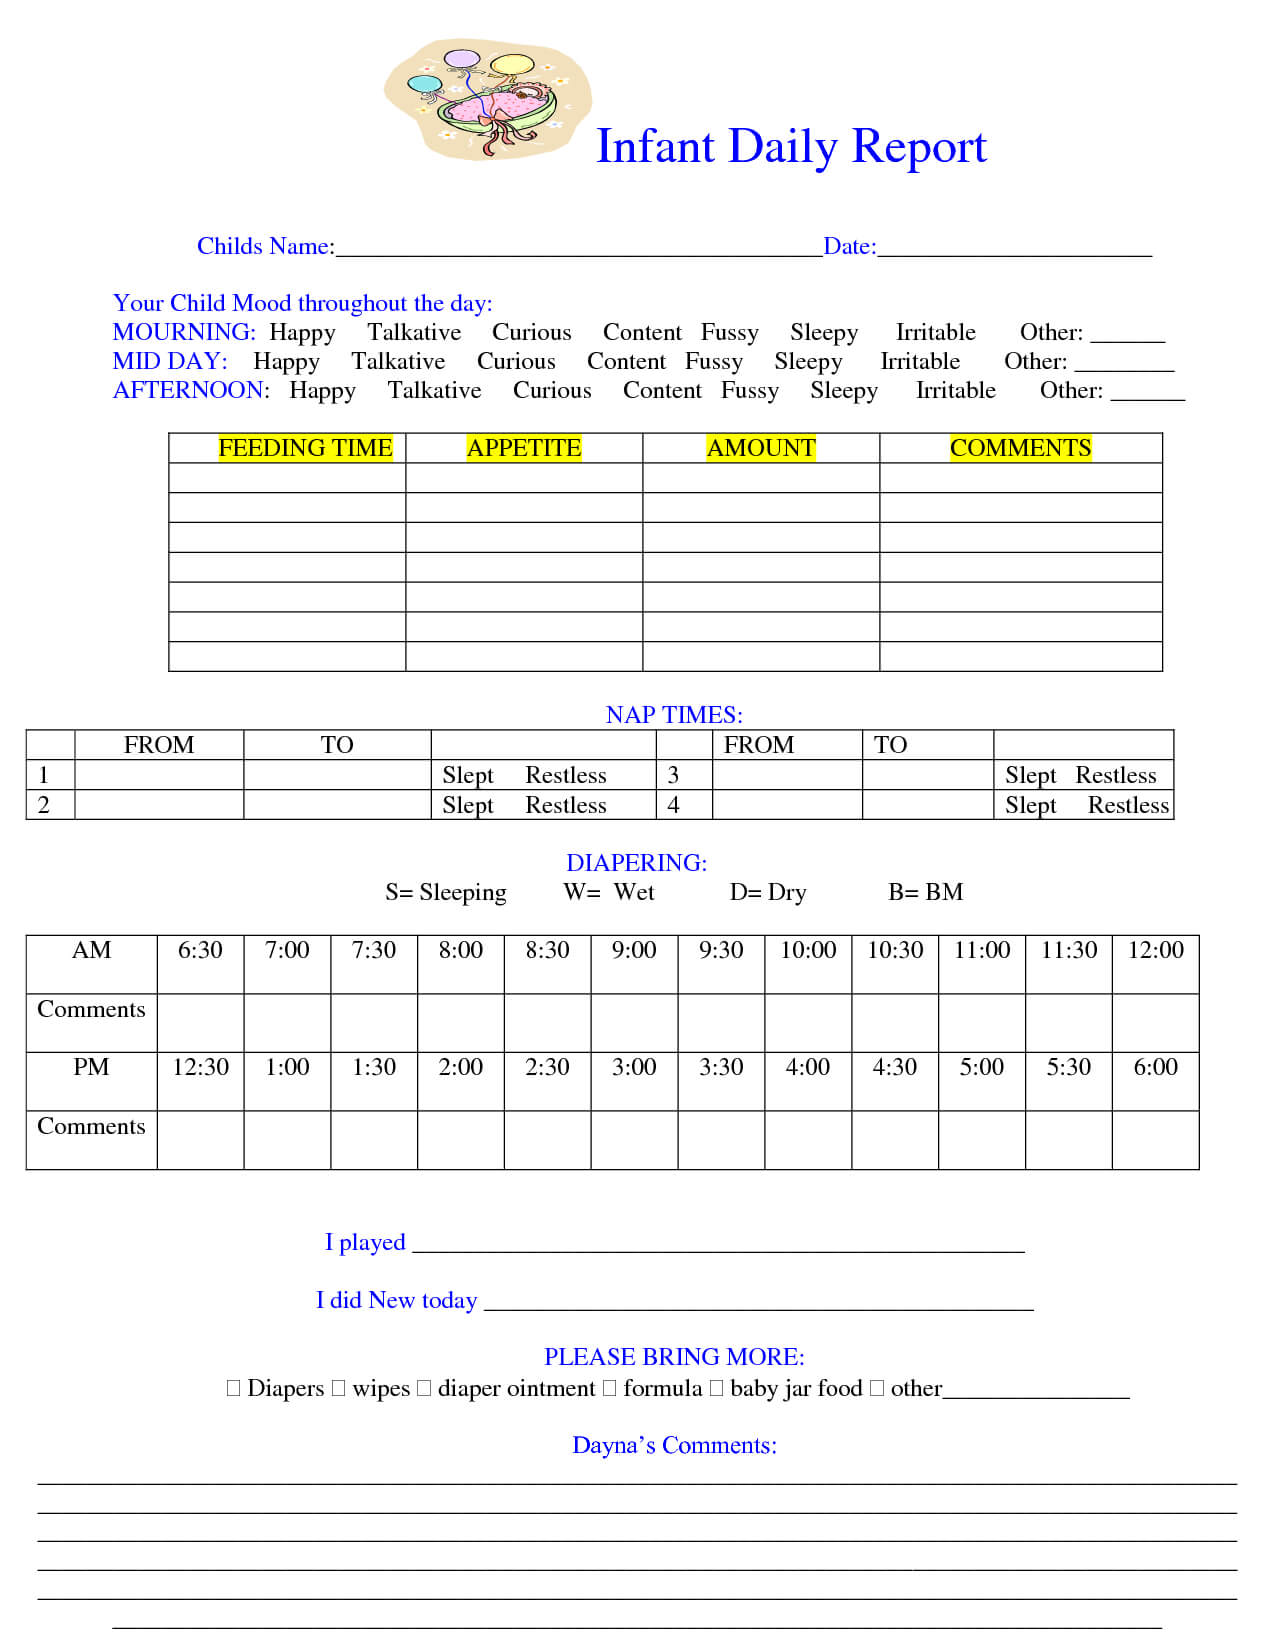 Baby Daily Sheet | Infant Daily Report - Download As Doc Throughout Daycare Infant Daily Report Template